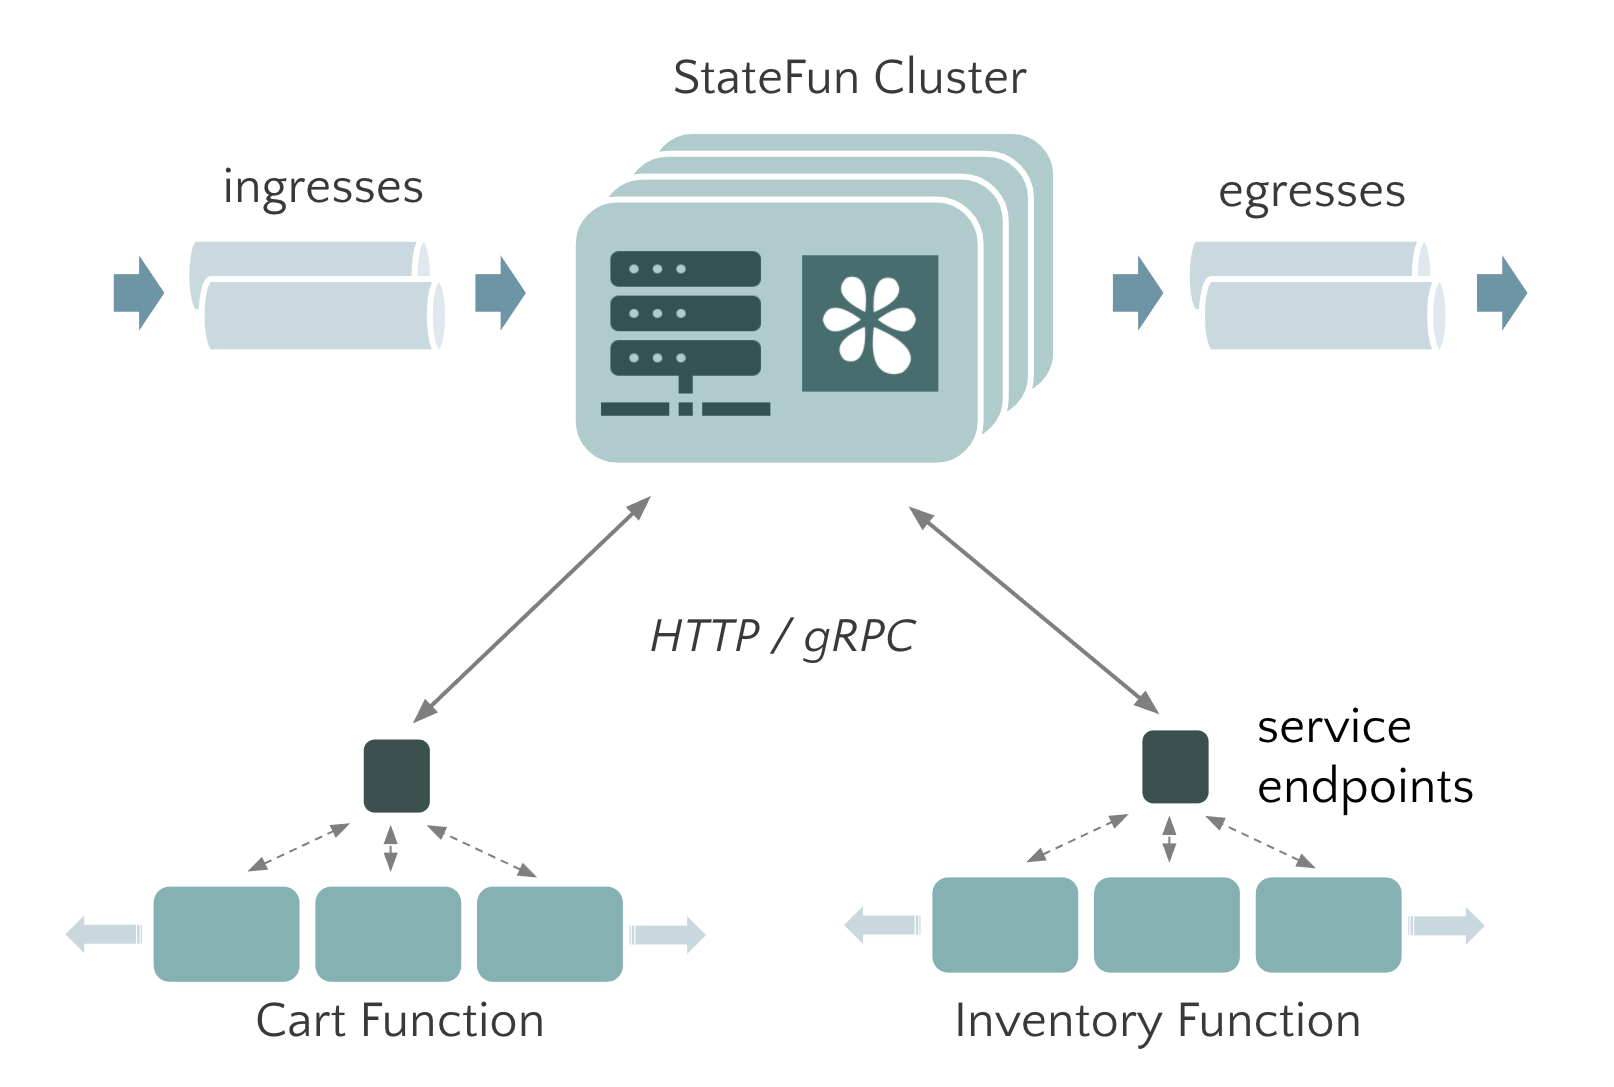 Simplified view of a StateFun app deployment